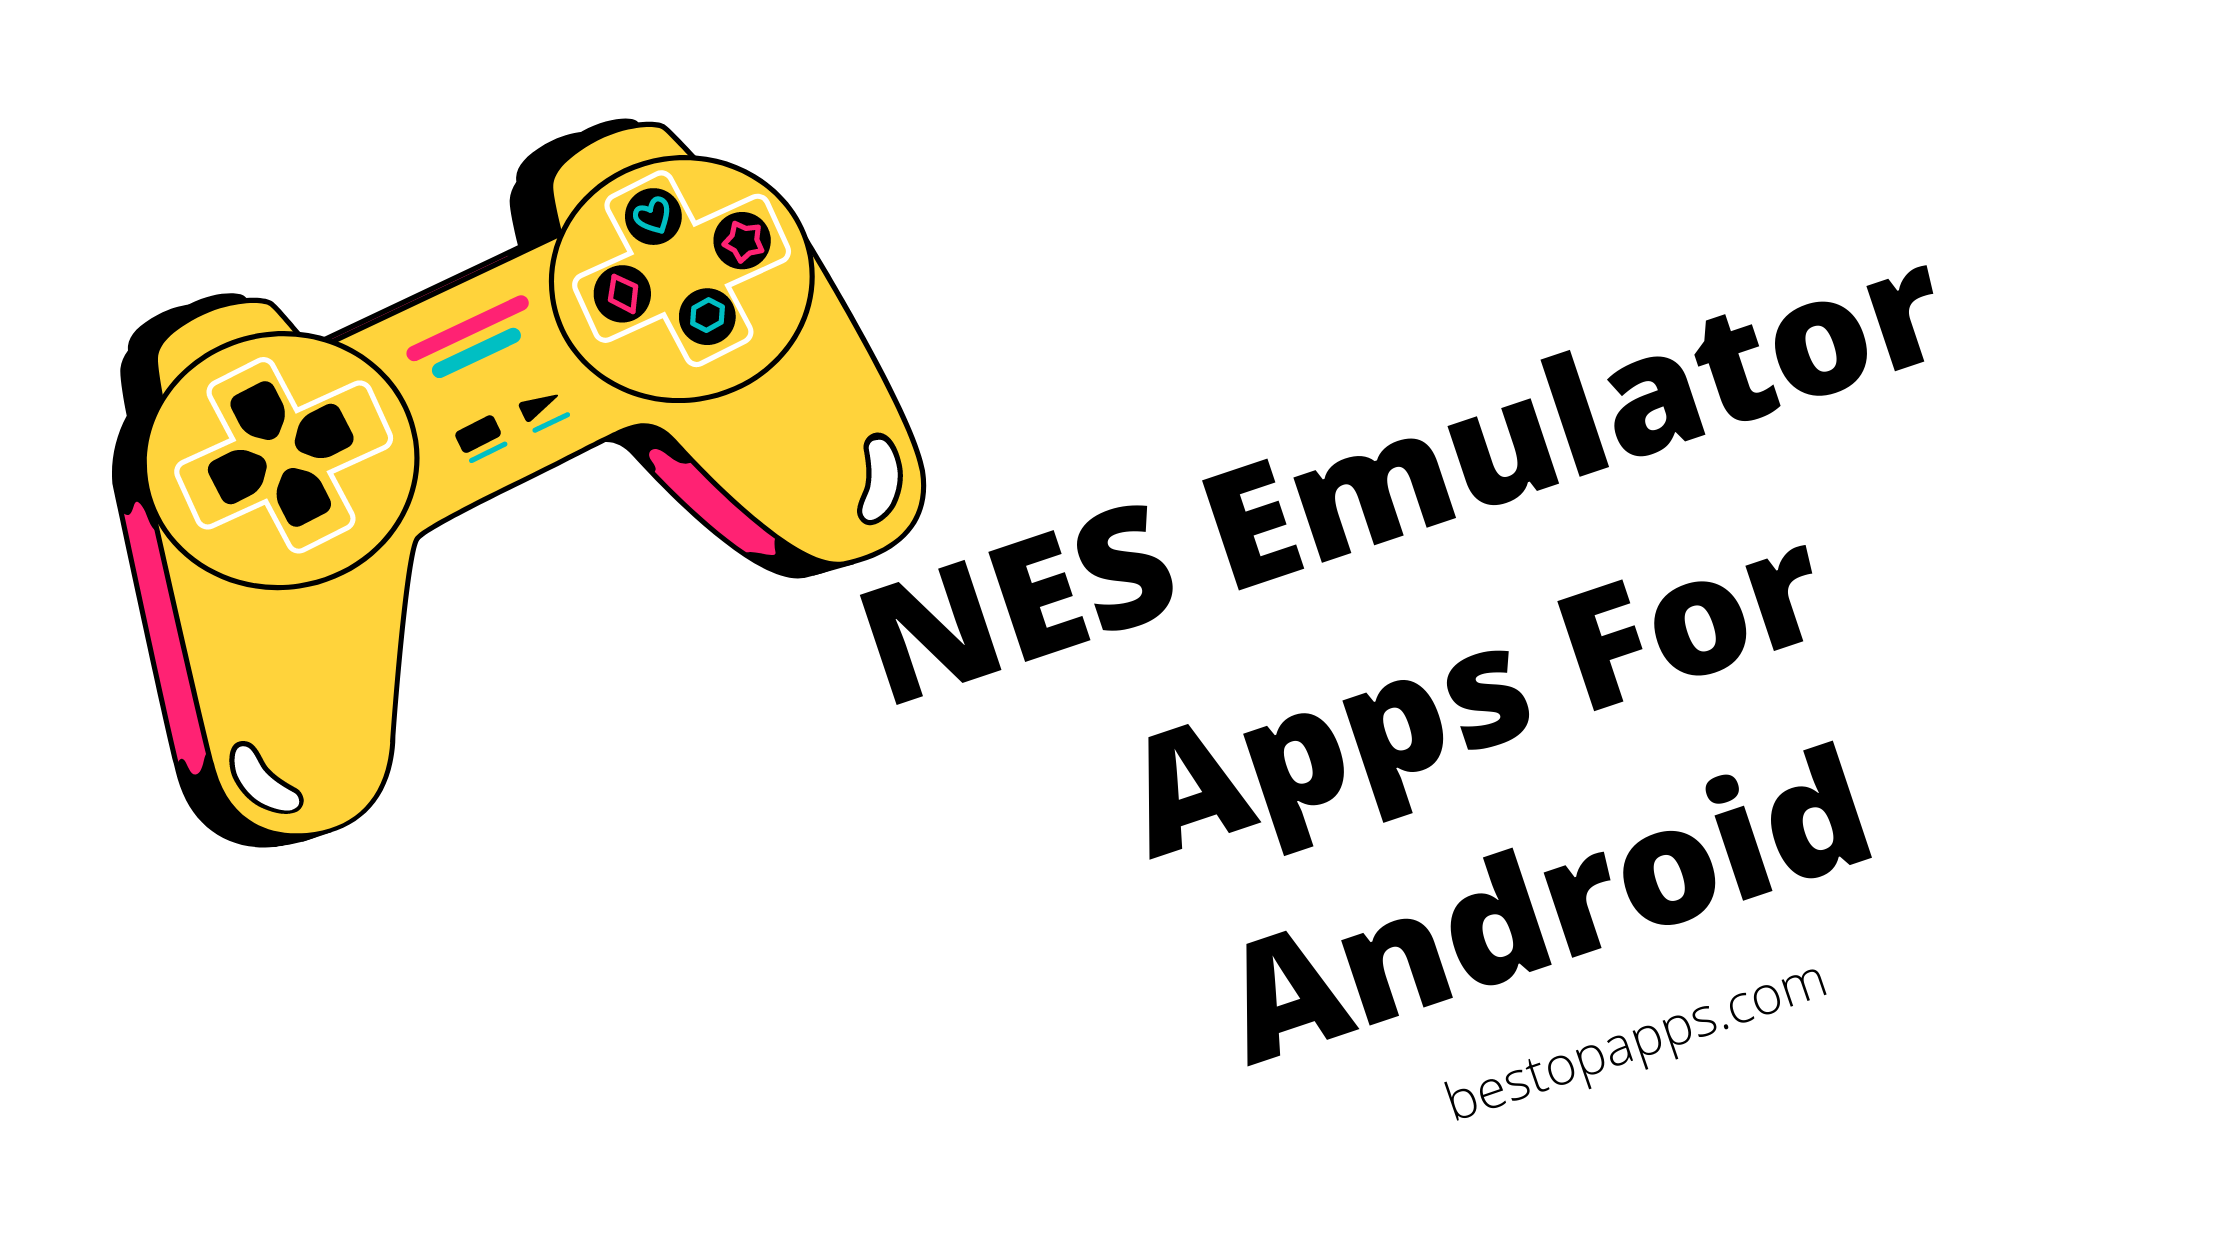 NES Emulator Apps For Android